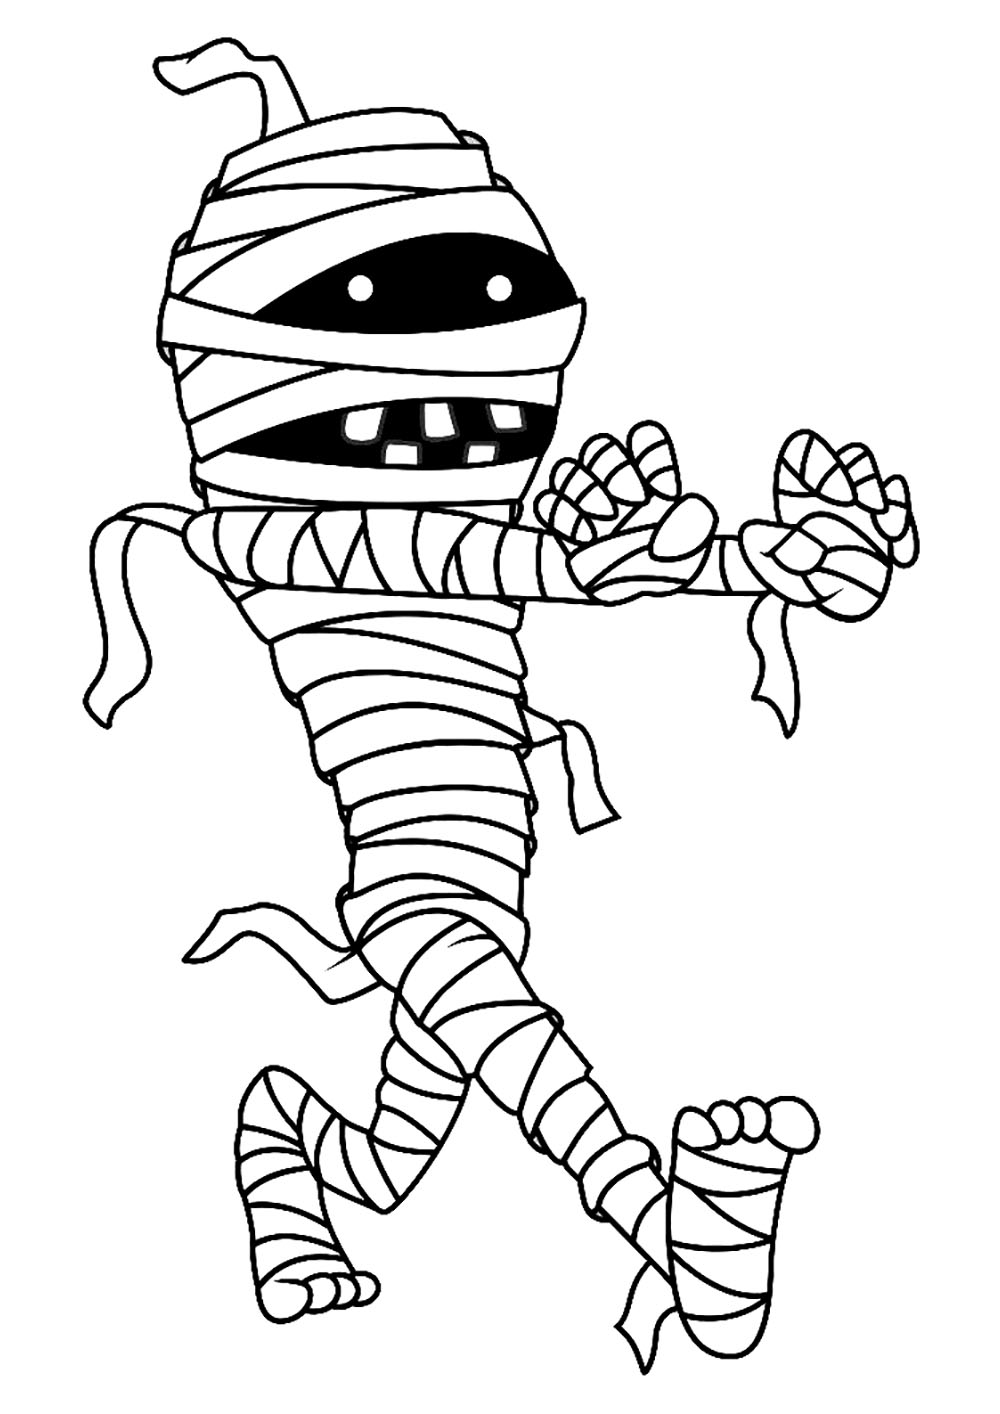 Halloween-for-children - Halloween Kids Coloring Pages